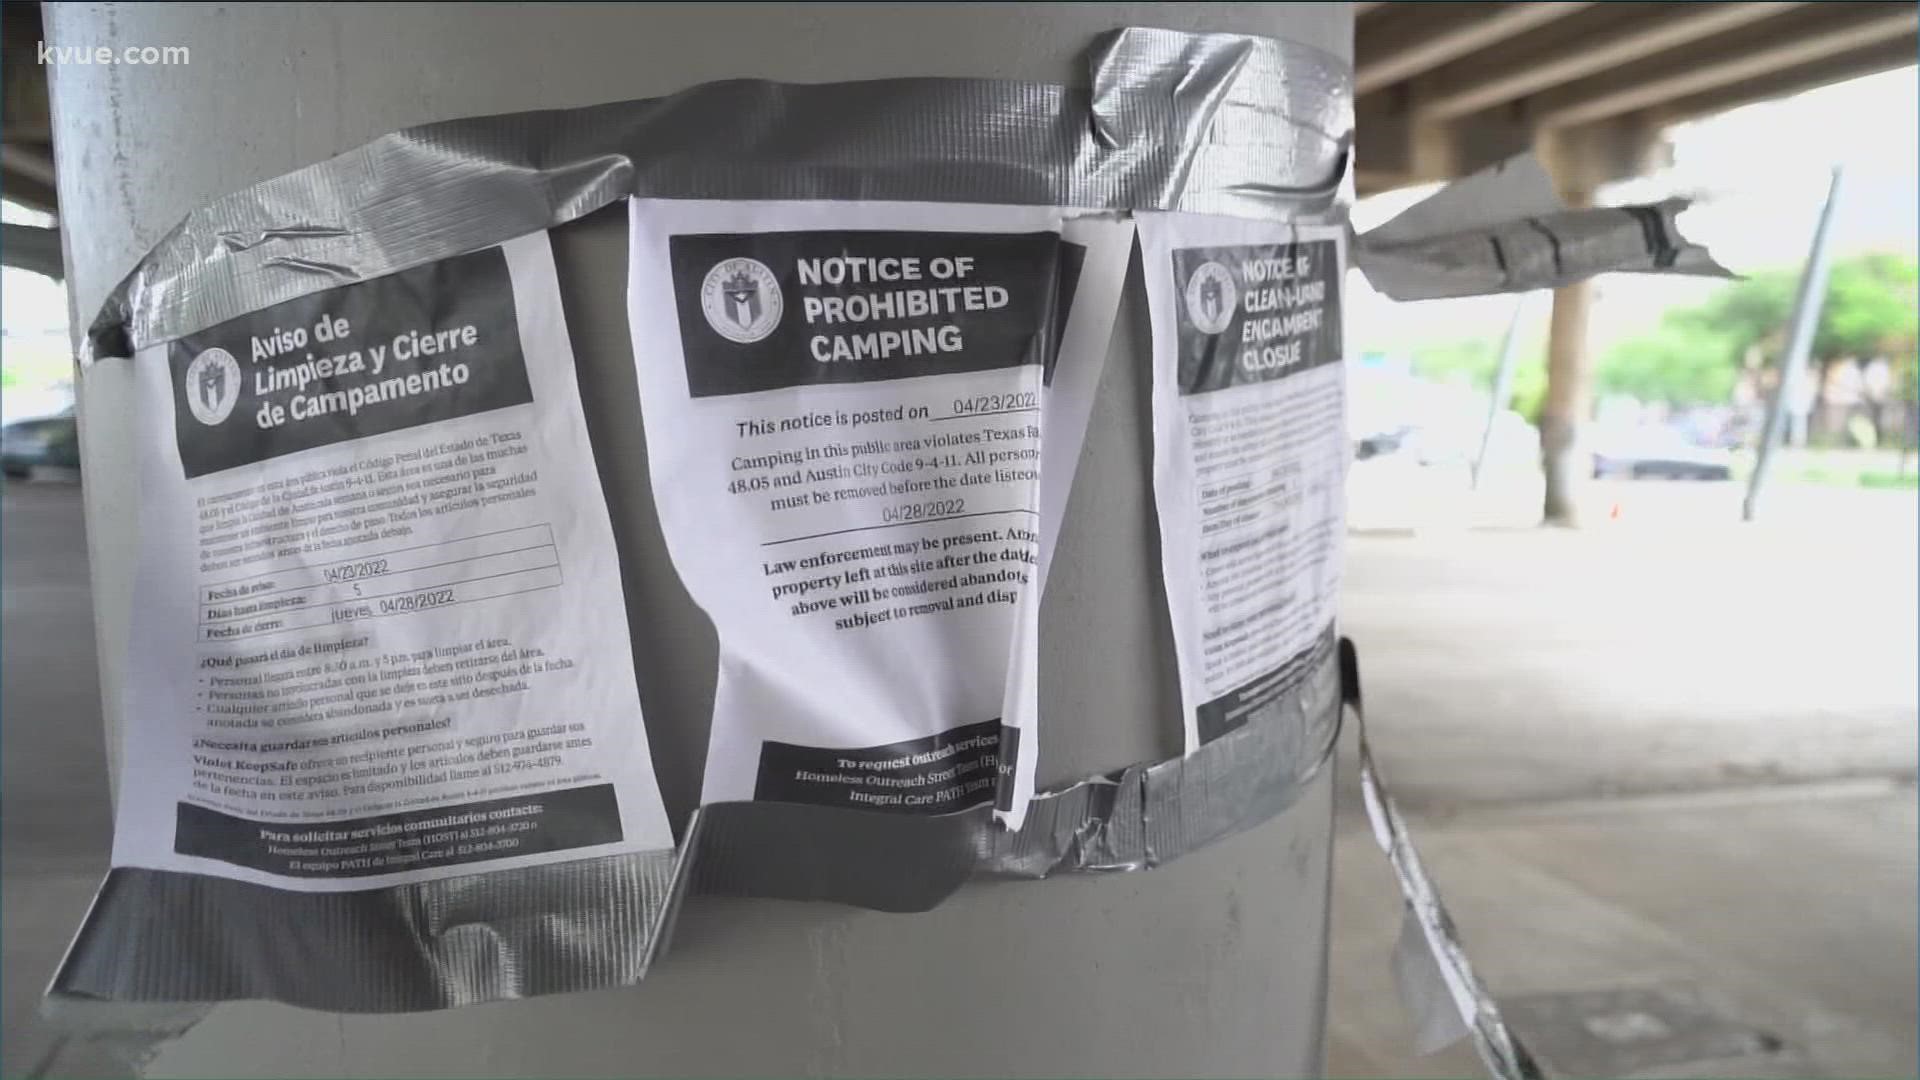 It's been a year since the public camping ban was reinstated and, as a result, tents are a less common sight in Downtown Austin. Yet the issue still remains.